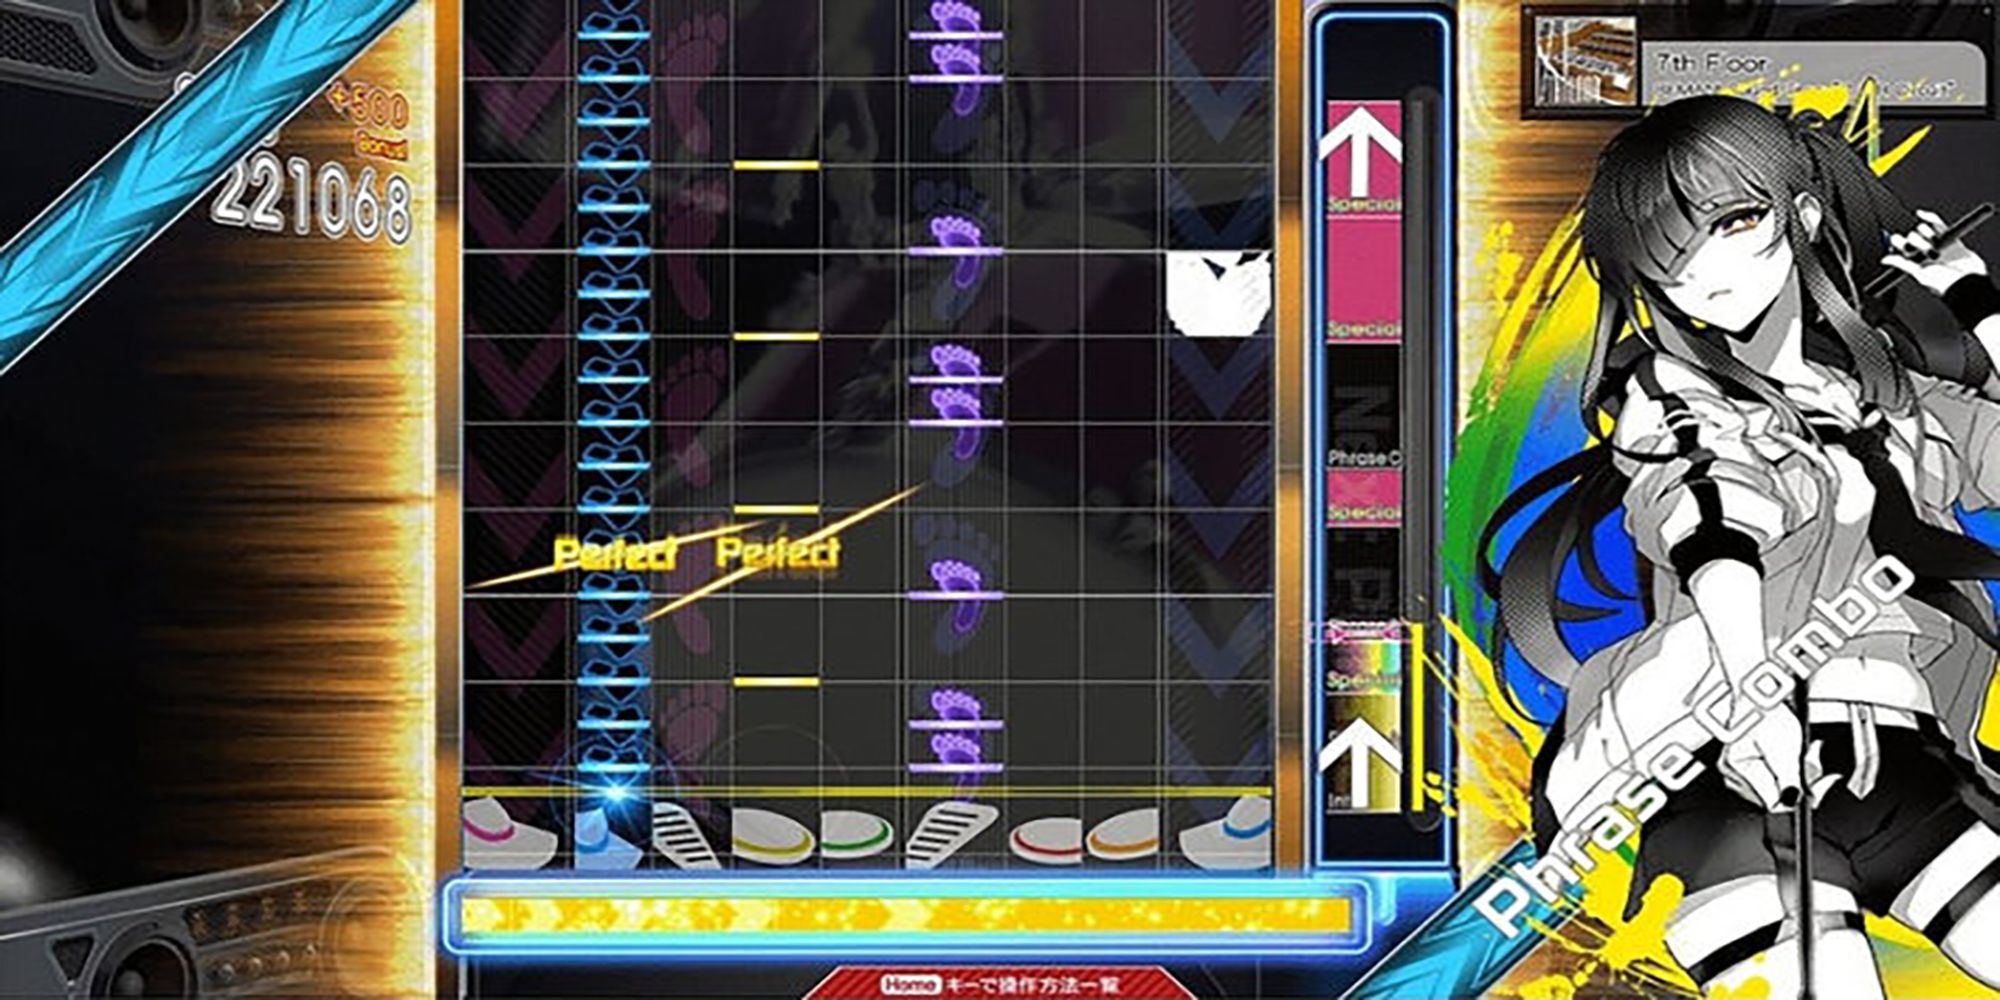 Foot pedal and cymbal icons scroll down the screen while the player achieves a Phrase Combo in Gitadora.